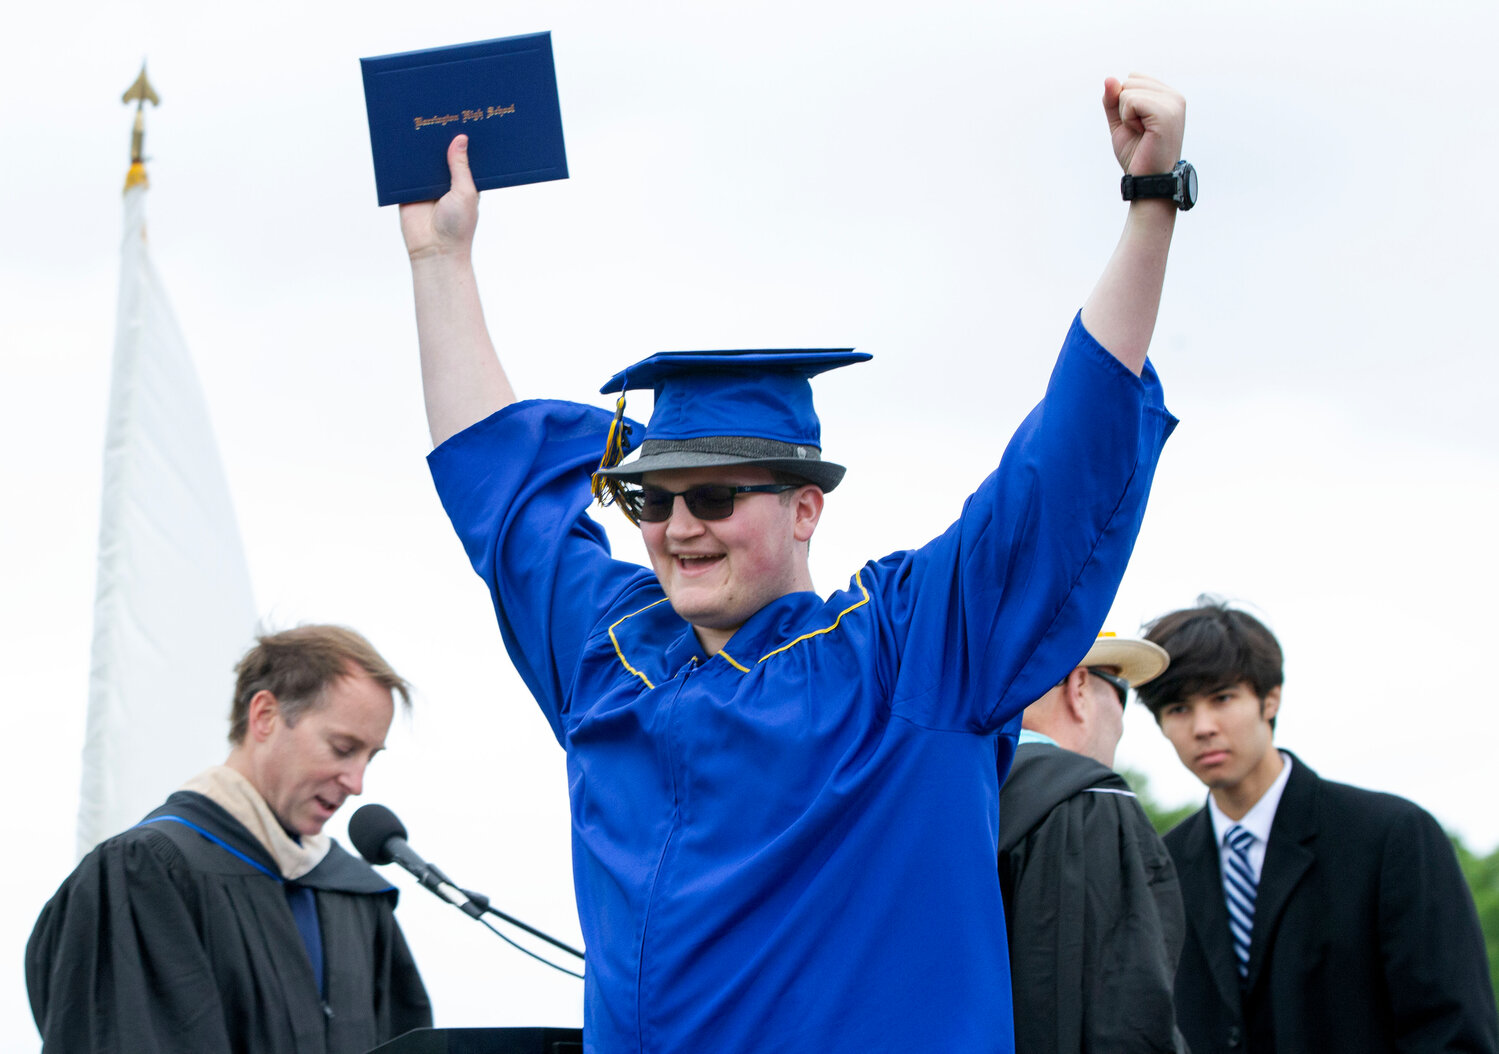 Austin Hall raises his hands in the air after receiving his diploma.